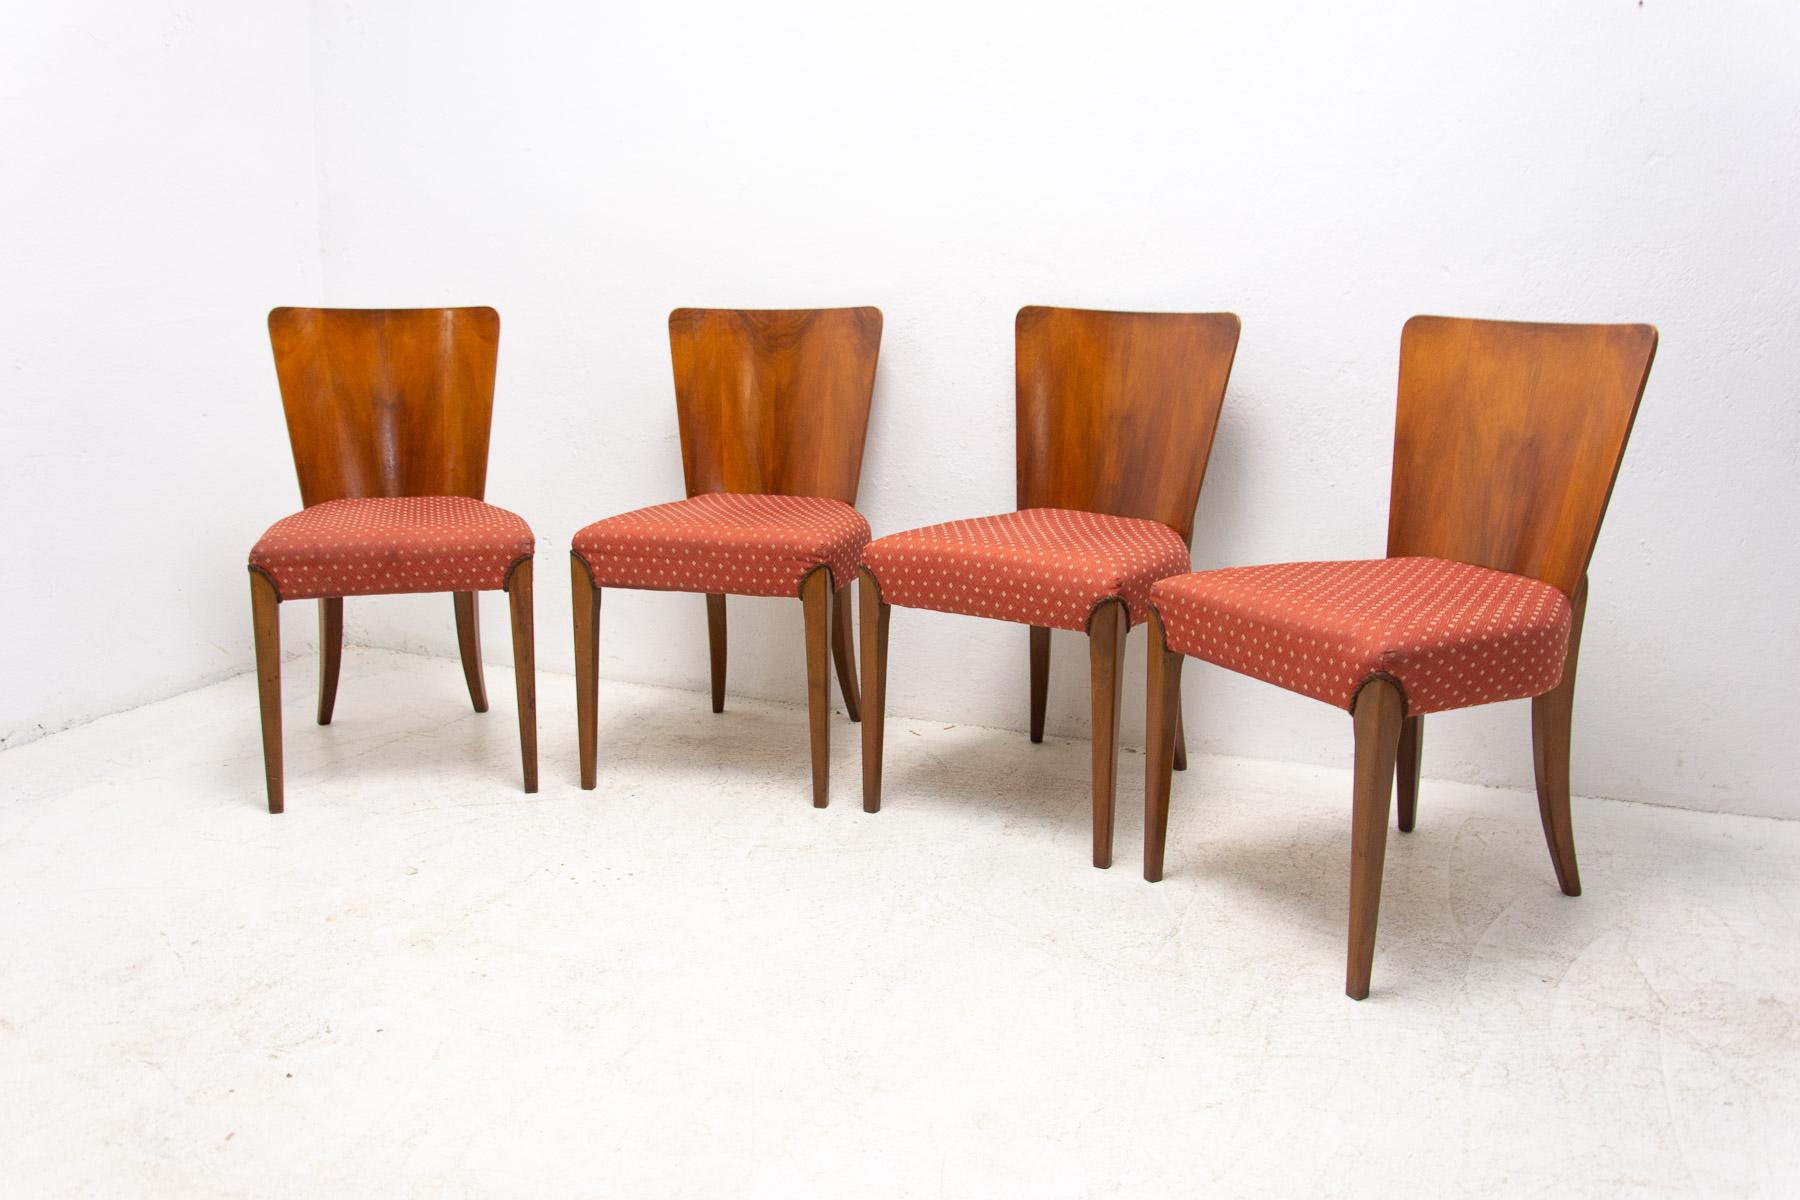 20th Century Art Deco Dining Chairs H-214 by Jindrich Halabala for ÚP Závody, 1950's For Sale